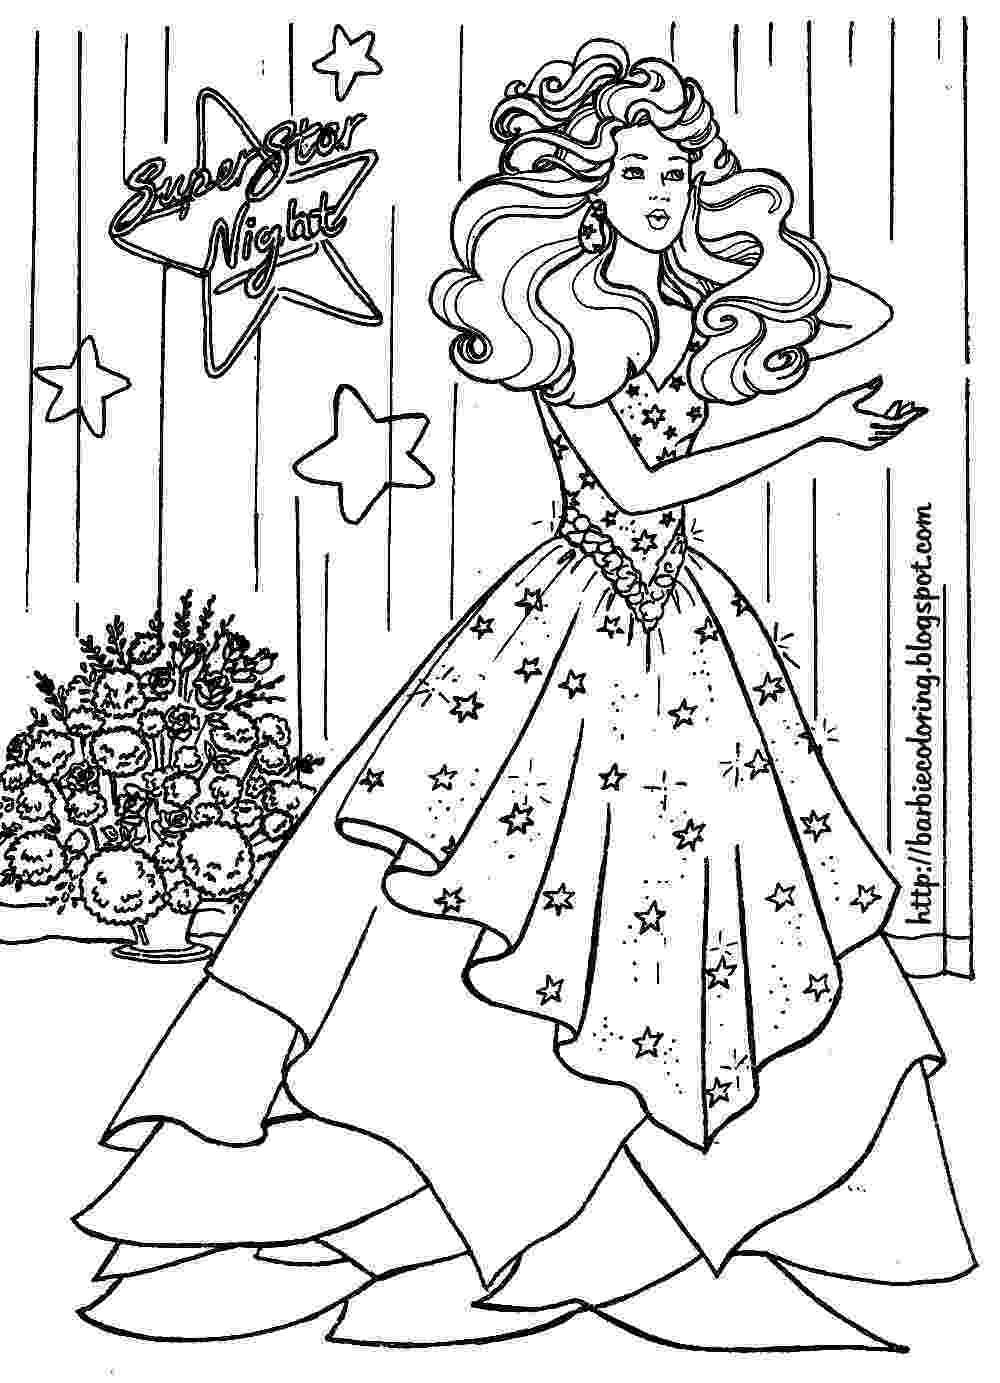 barbie doll pictures to color barbie and ken coloring pages free download barbie color to doll barbie pictures 